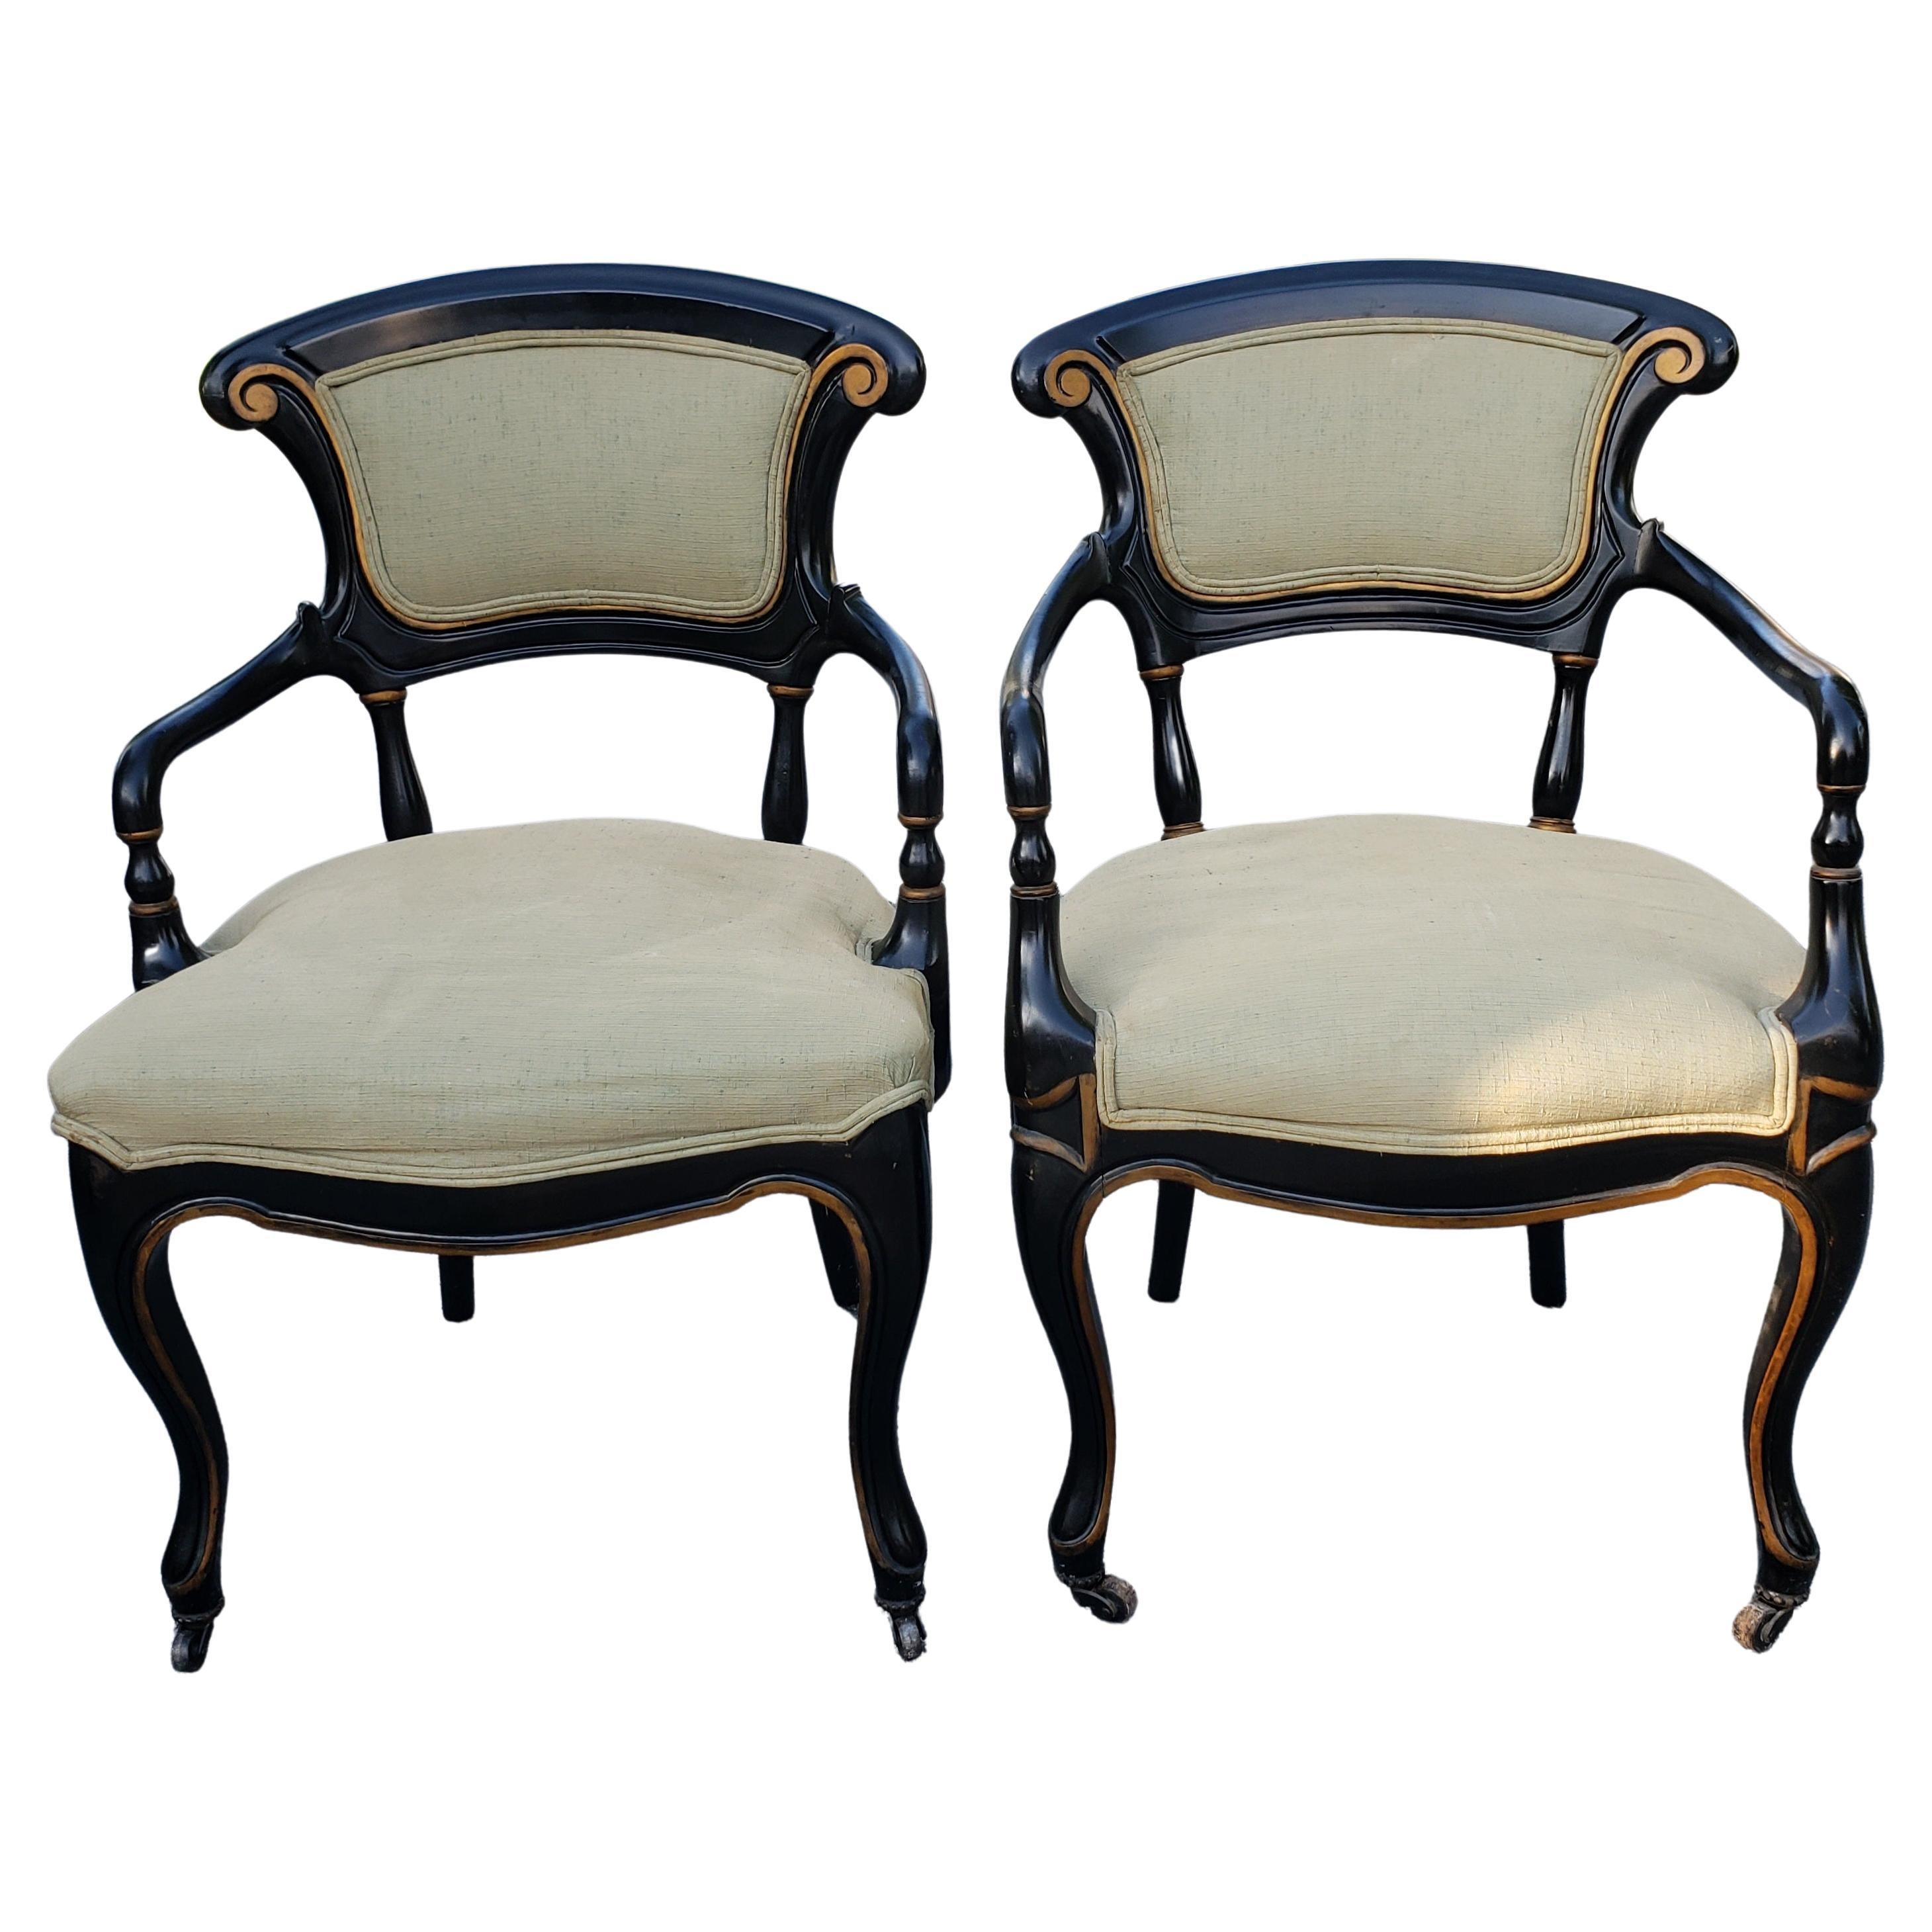 19th C. Rococo Gustavian Ebonized and Partial Gilt Upholstered ArmChairs, Pair For Sale